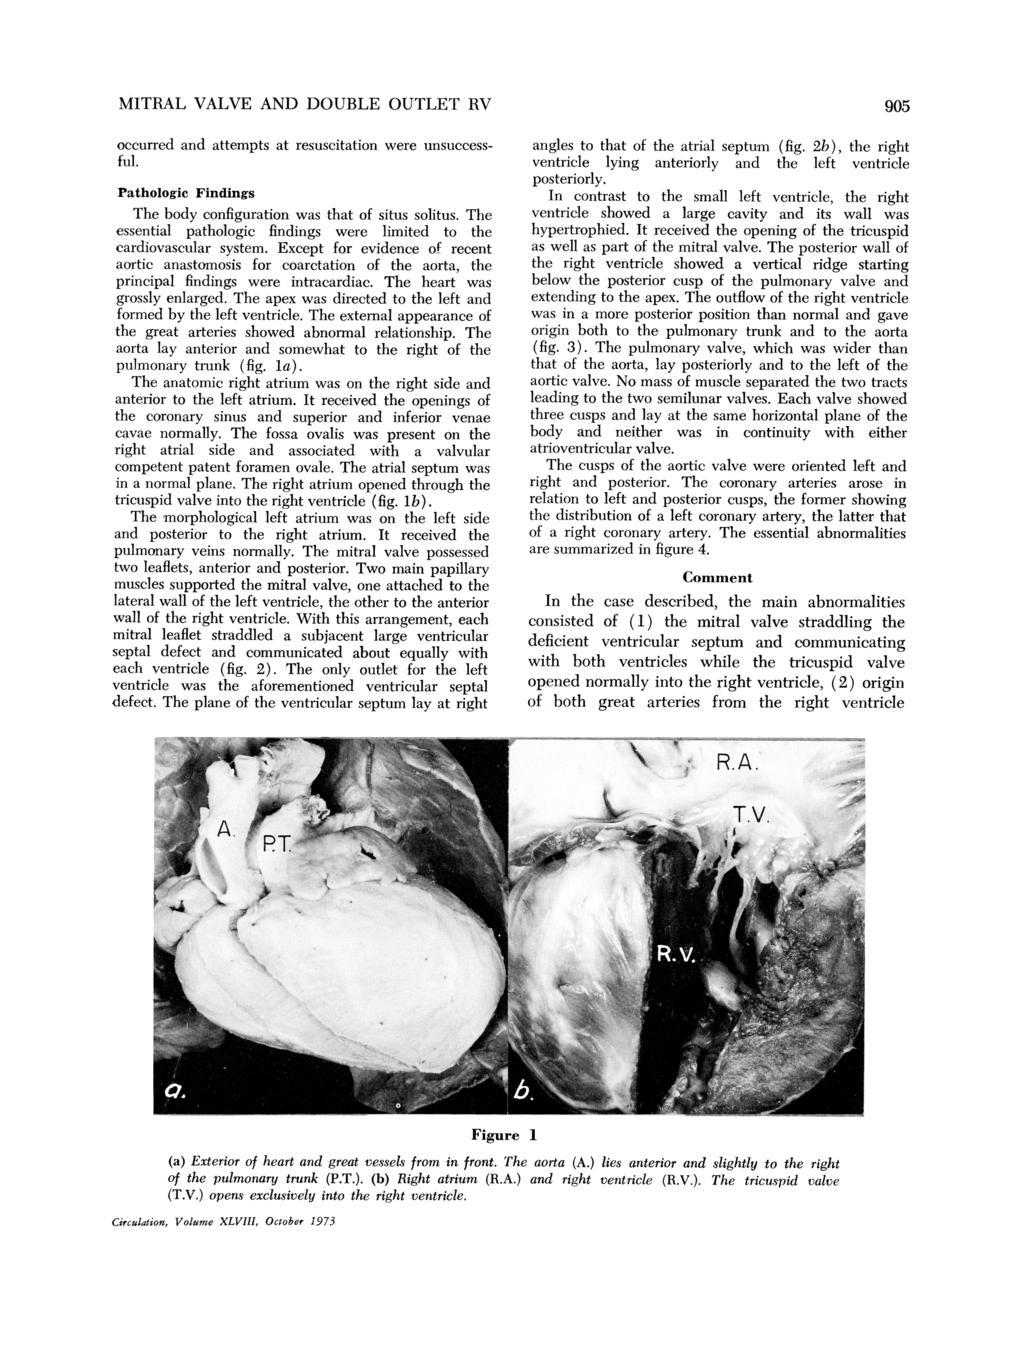 MITRAL VALVE AND DOUBLE OUTLET R9 occurred and attempts at resuscitation were unsuccessful. Pathologic Findings The body configuration was that of situs solitus.